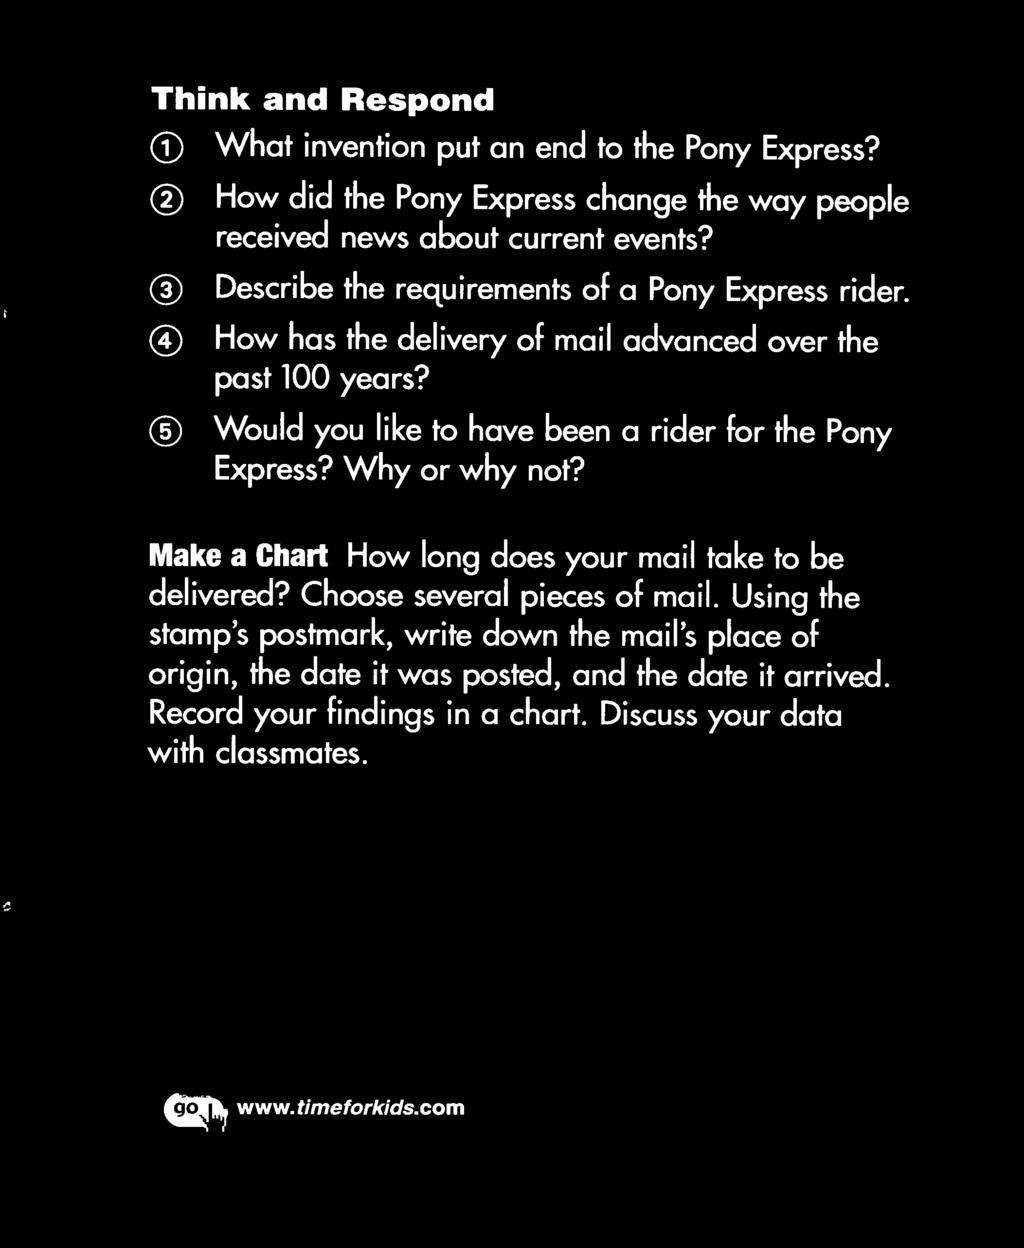 Would you like to have been a rider for the Pony Express? Why or why not?